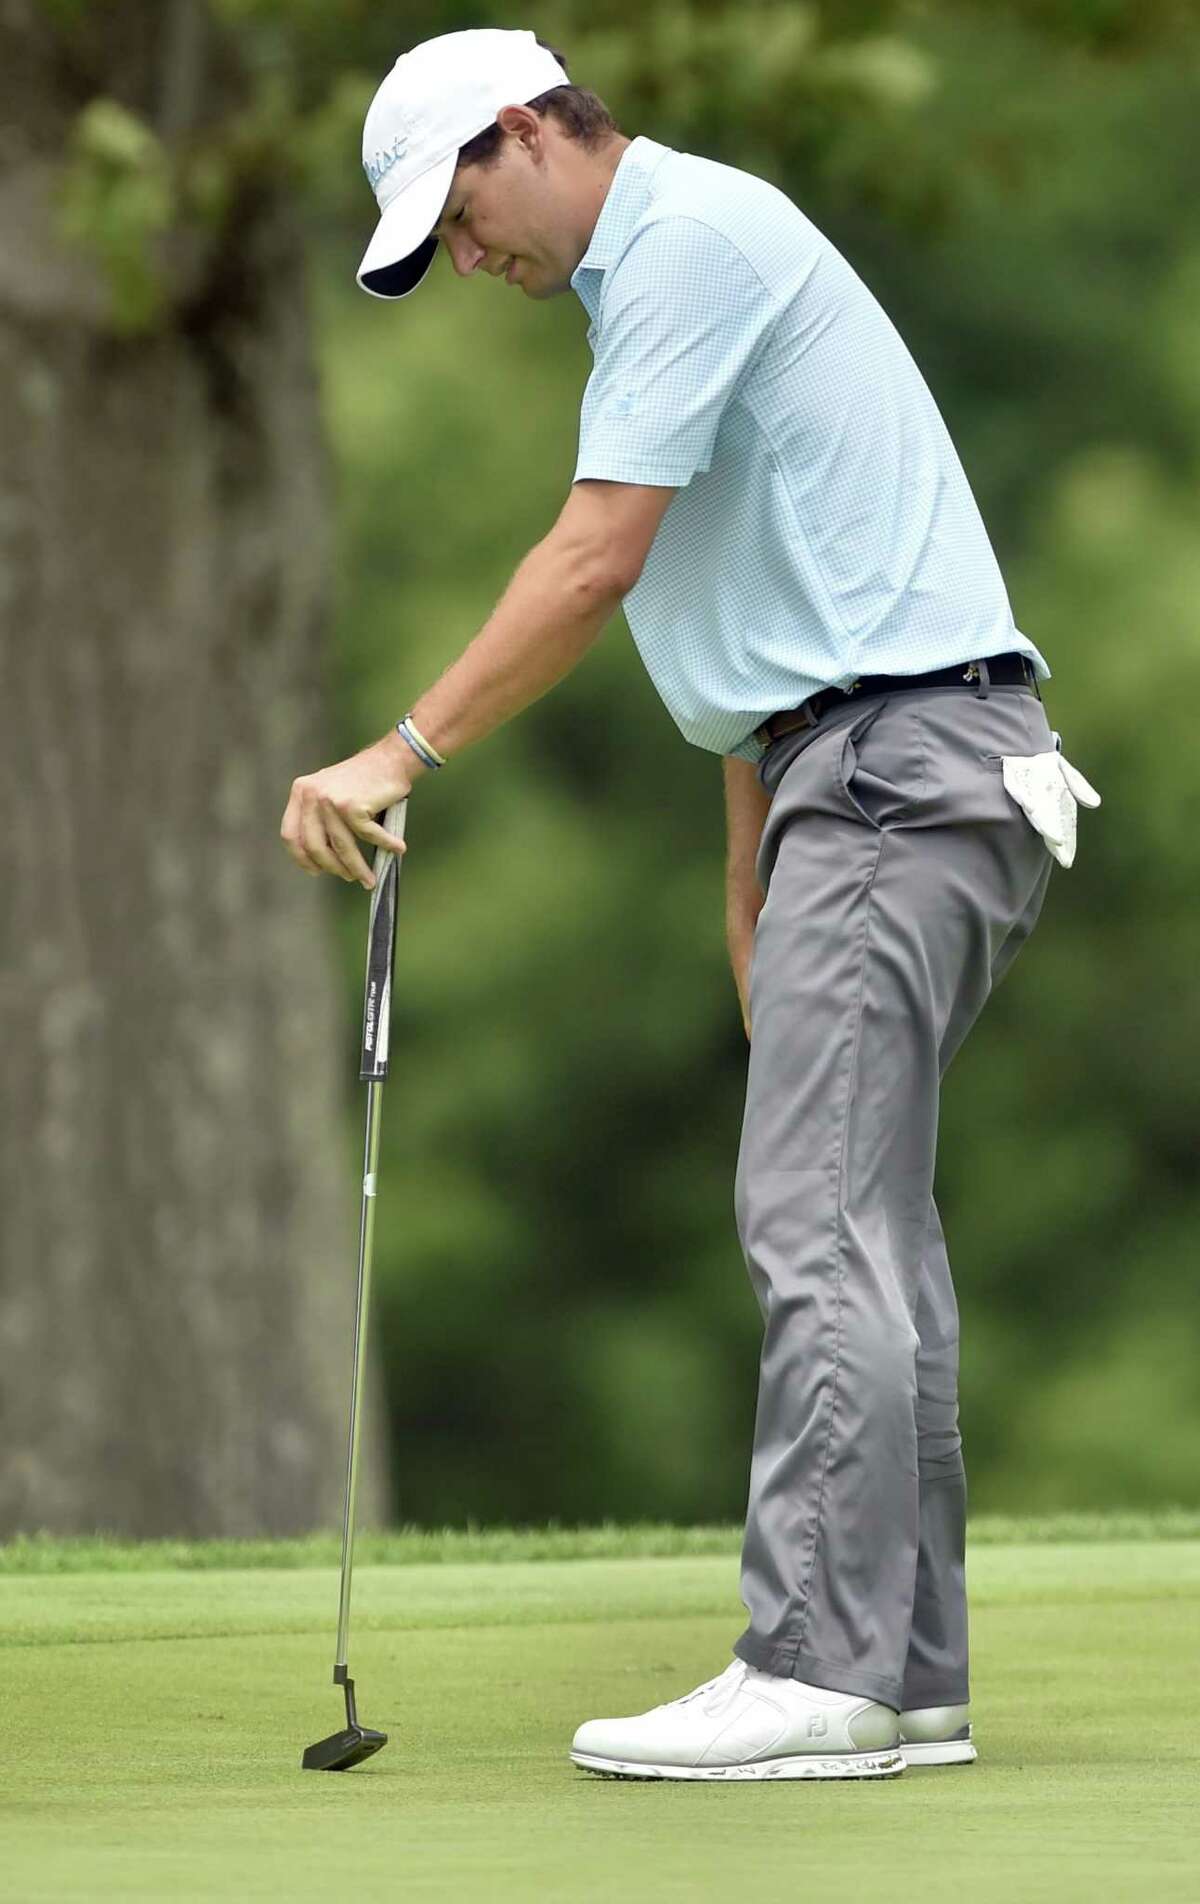 New Canaan’s J.C. Swift of reacts to a missed putt on the 15th hole during the final round of the Connecticut Open Wednesday at the New Haven Country Club in Hamden. Swift finished second behind John VanDerLaan of Southbury.